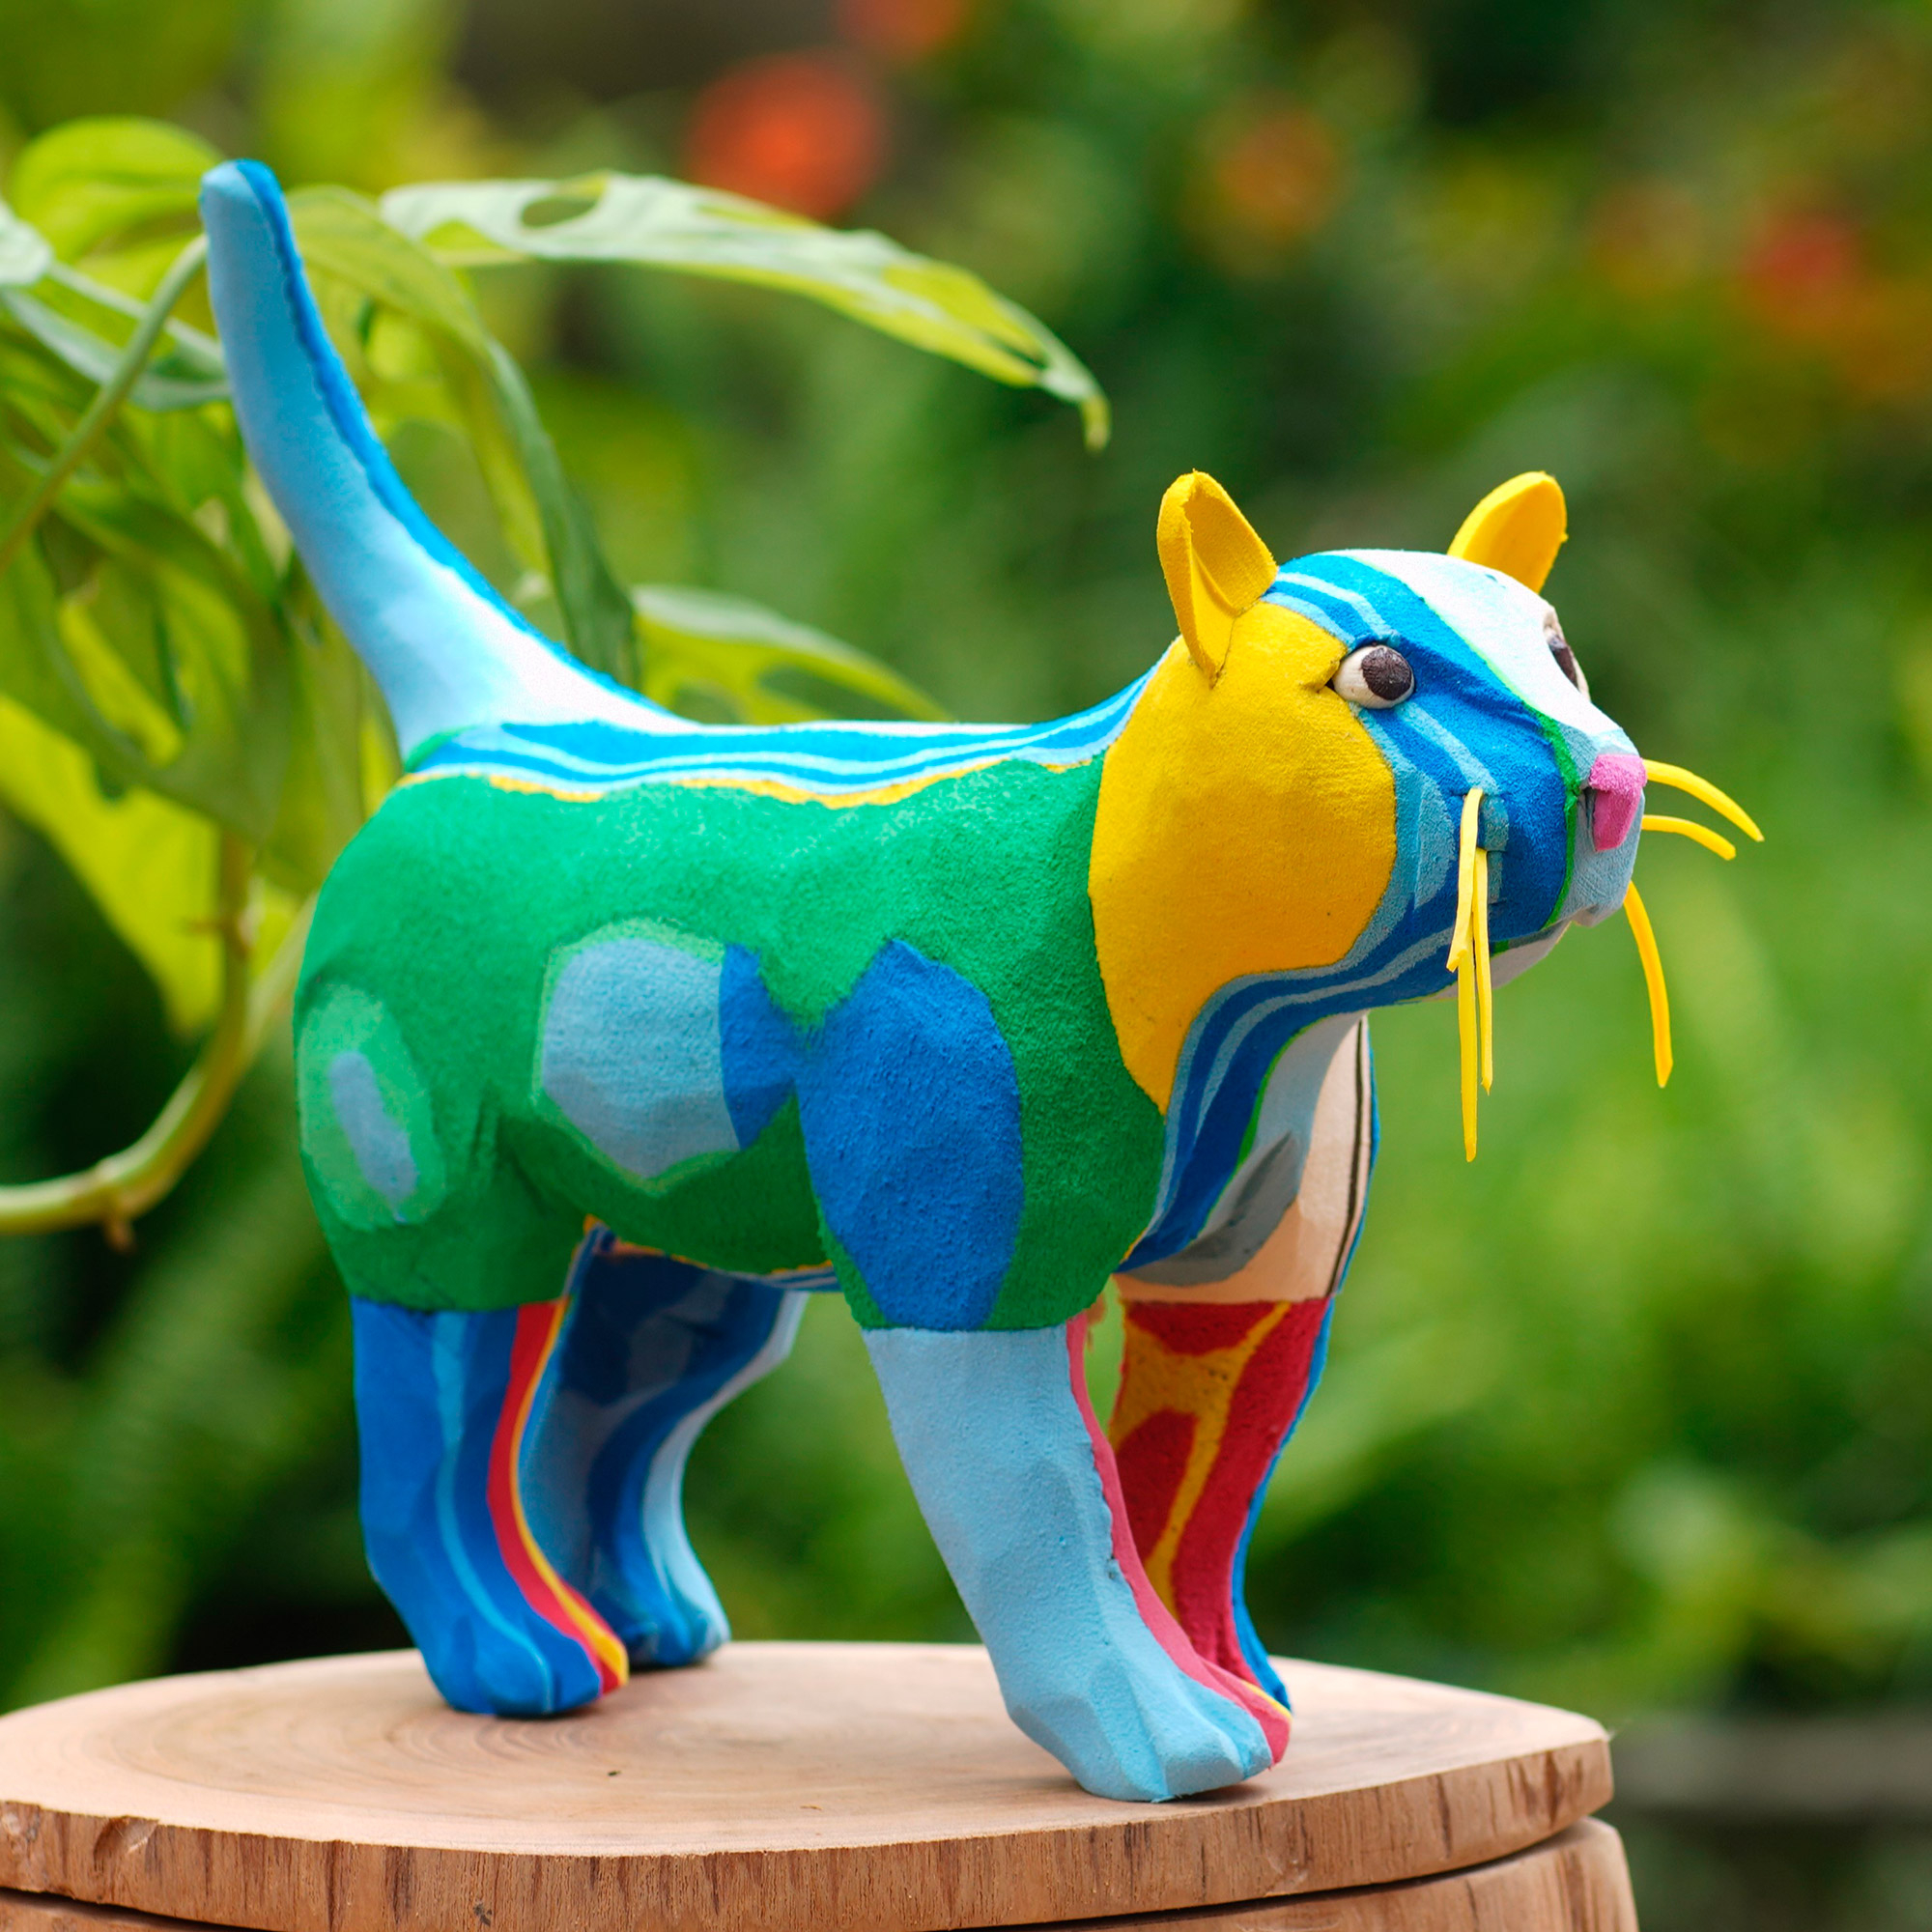 Handcrafted Recycled Flip-Flop Cat Sculpture - Eco Cat